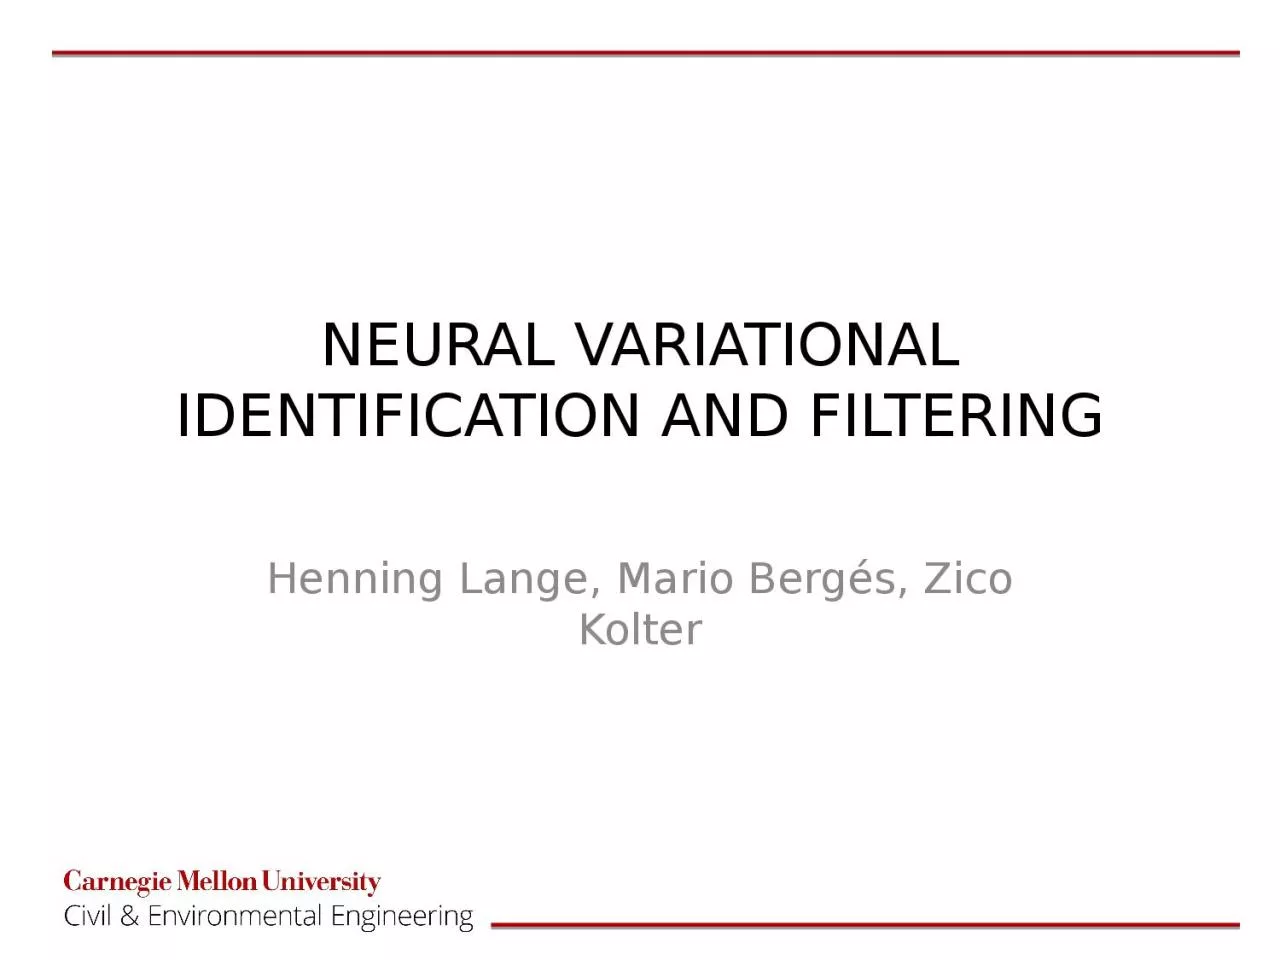 NEURAL VARIATIONAL IDENTIFICATION AND FILTERING